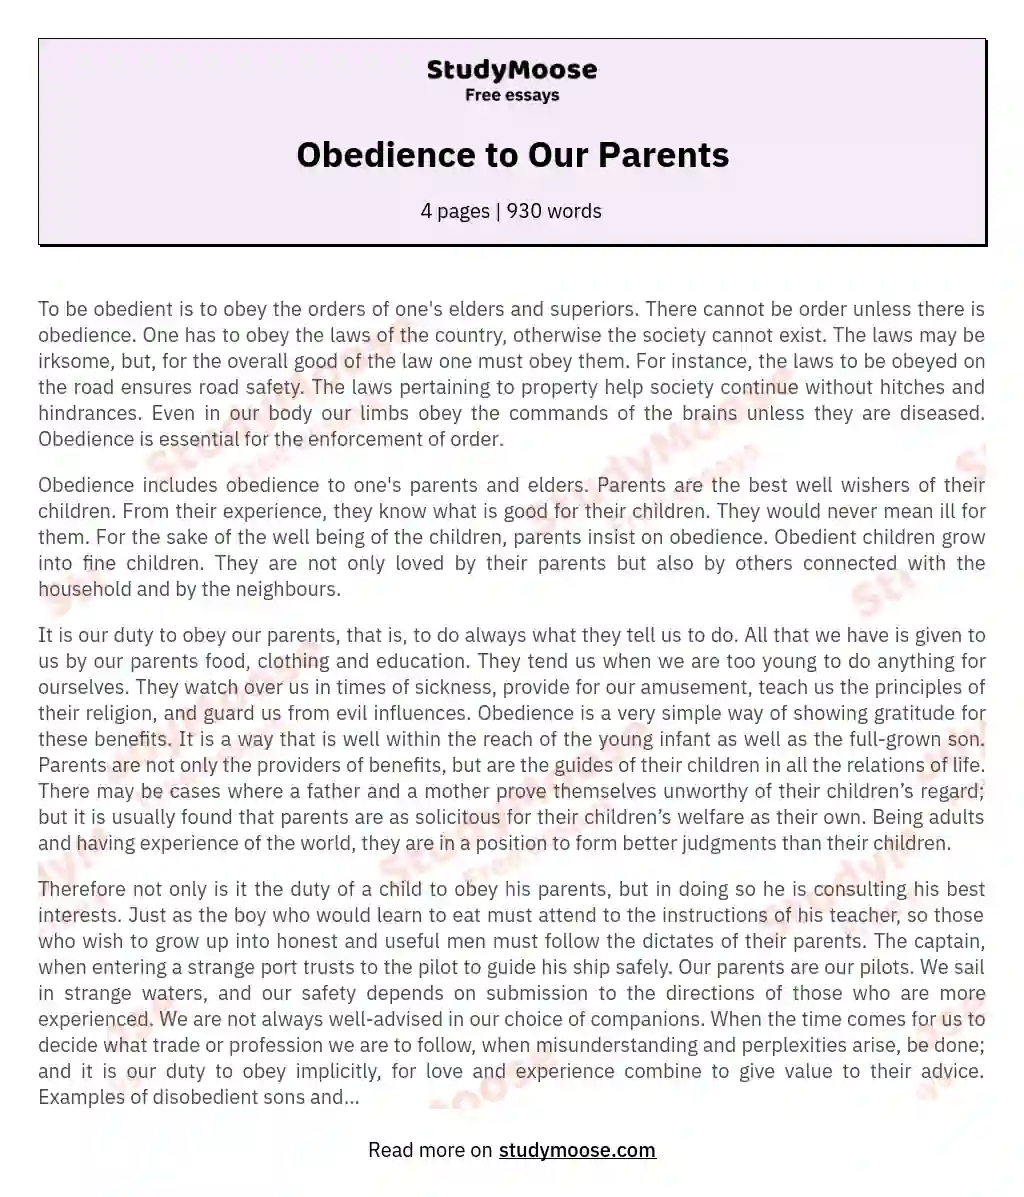 Obedience to Our Parents essay